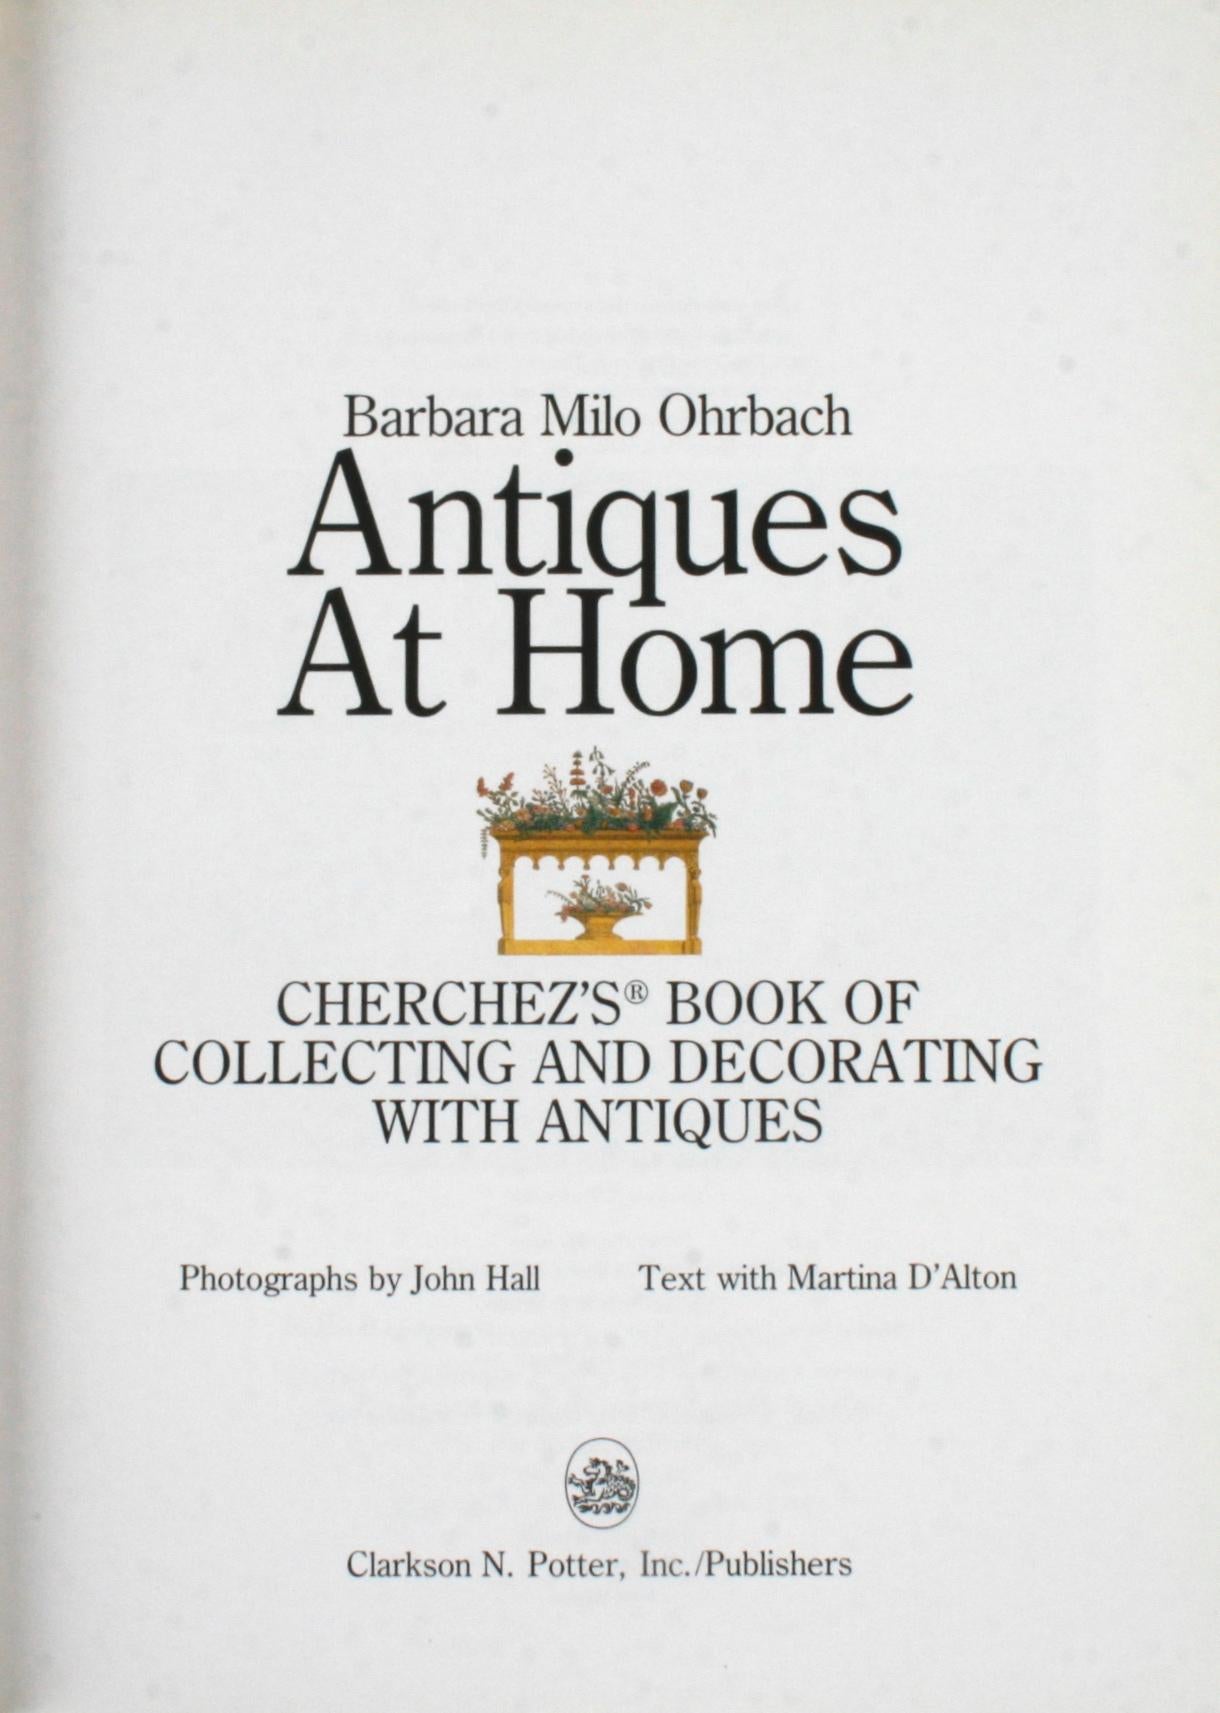 Antiques At Home by Barbara Milo Ohrbach. New York: Clarkson N. Potter, Inc. Publishers, 1989. Stated first edition hardcover with dust jacket. 246 pp. Guide to collecting, living and decorating with antiques from the owner of Cherchez, New York's